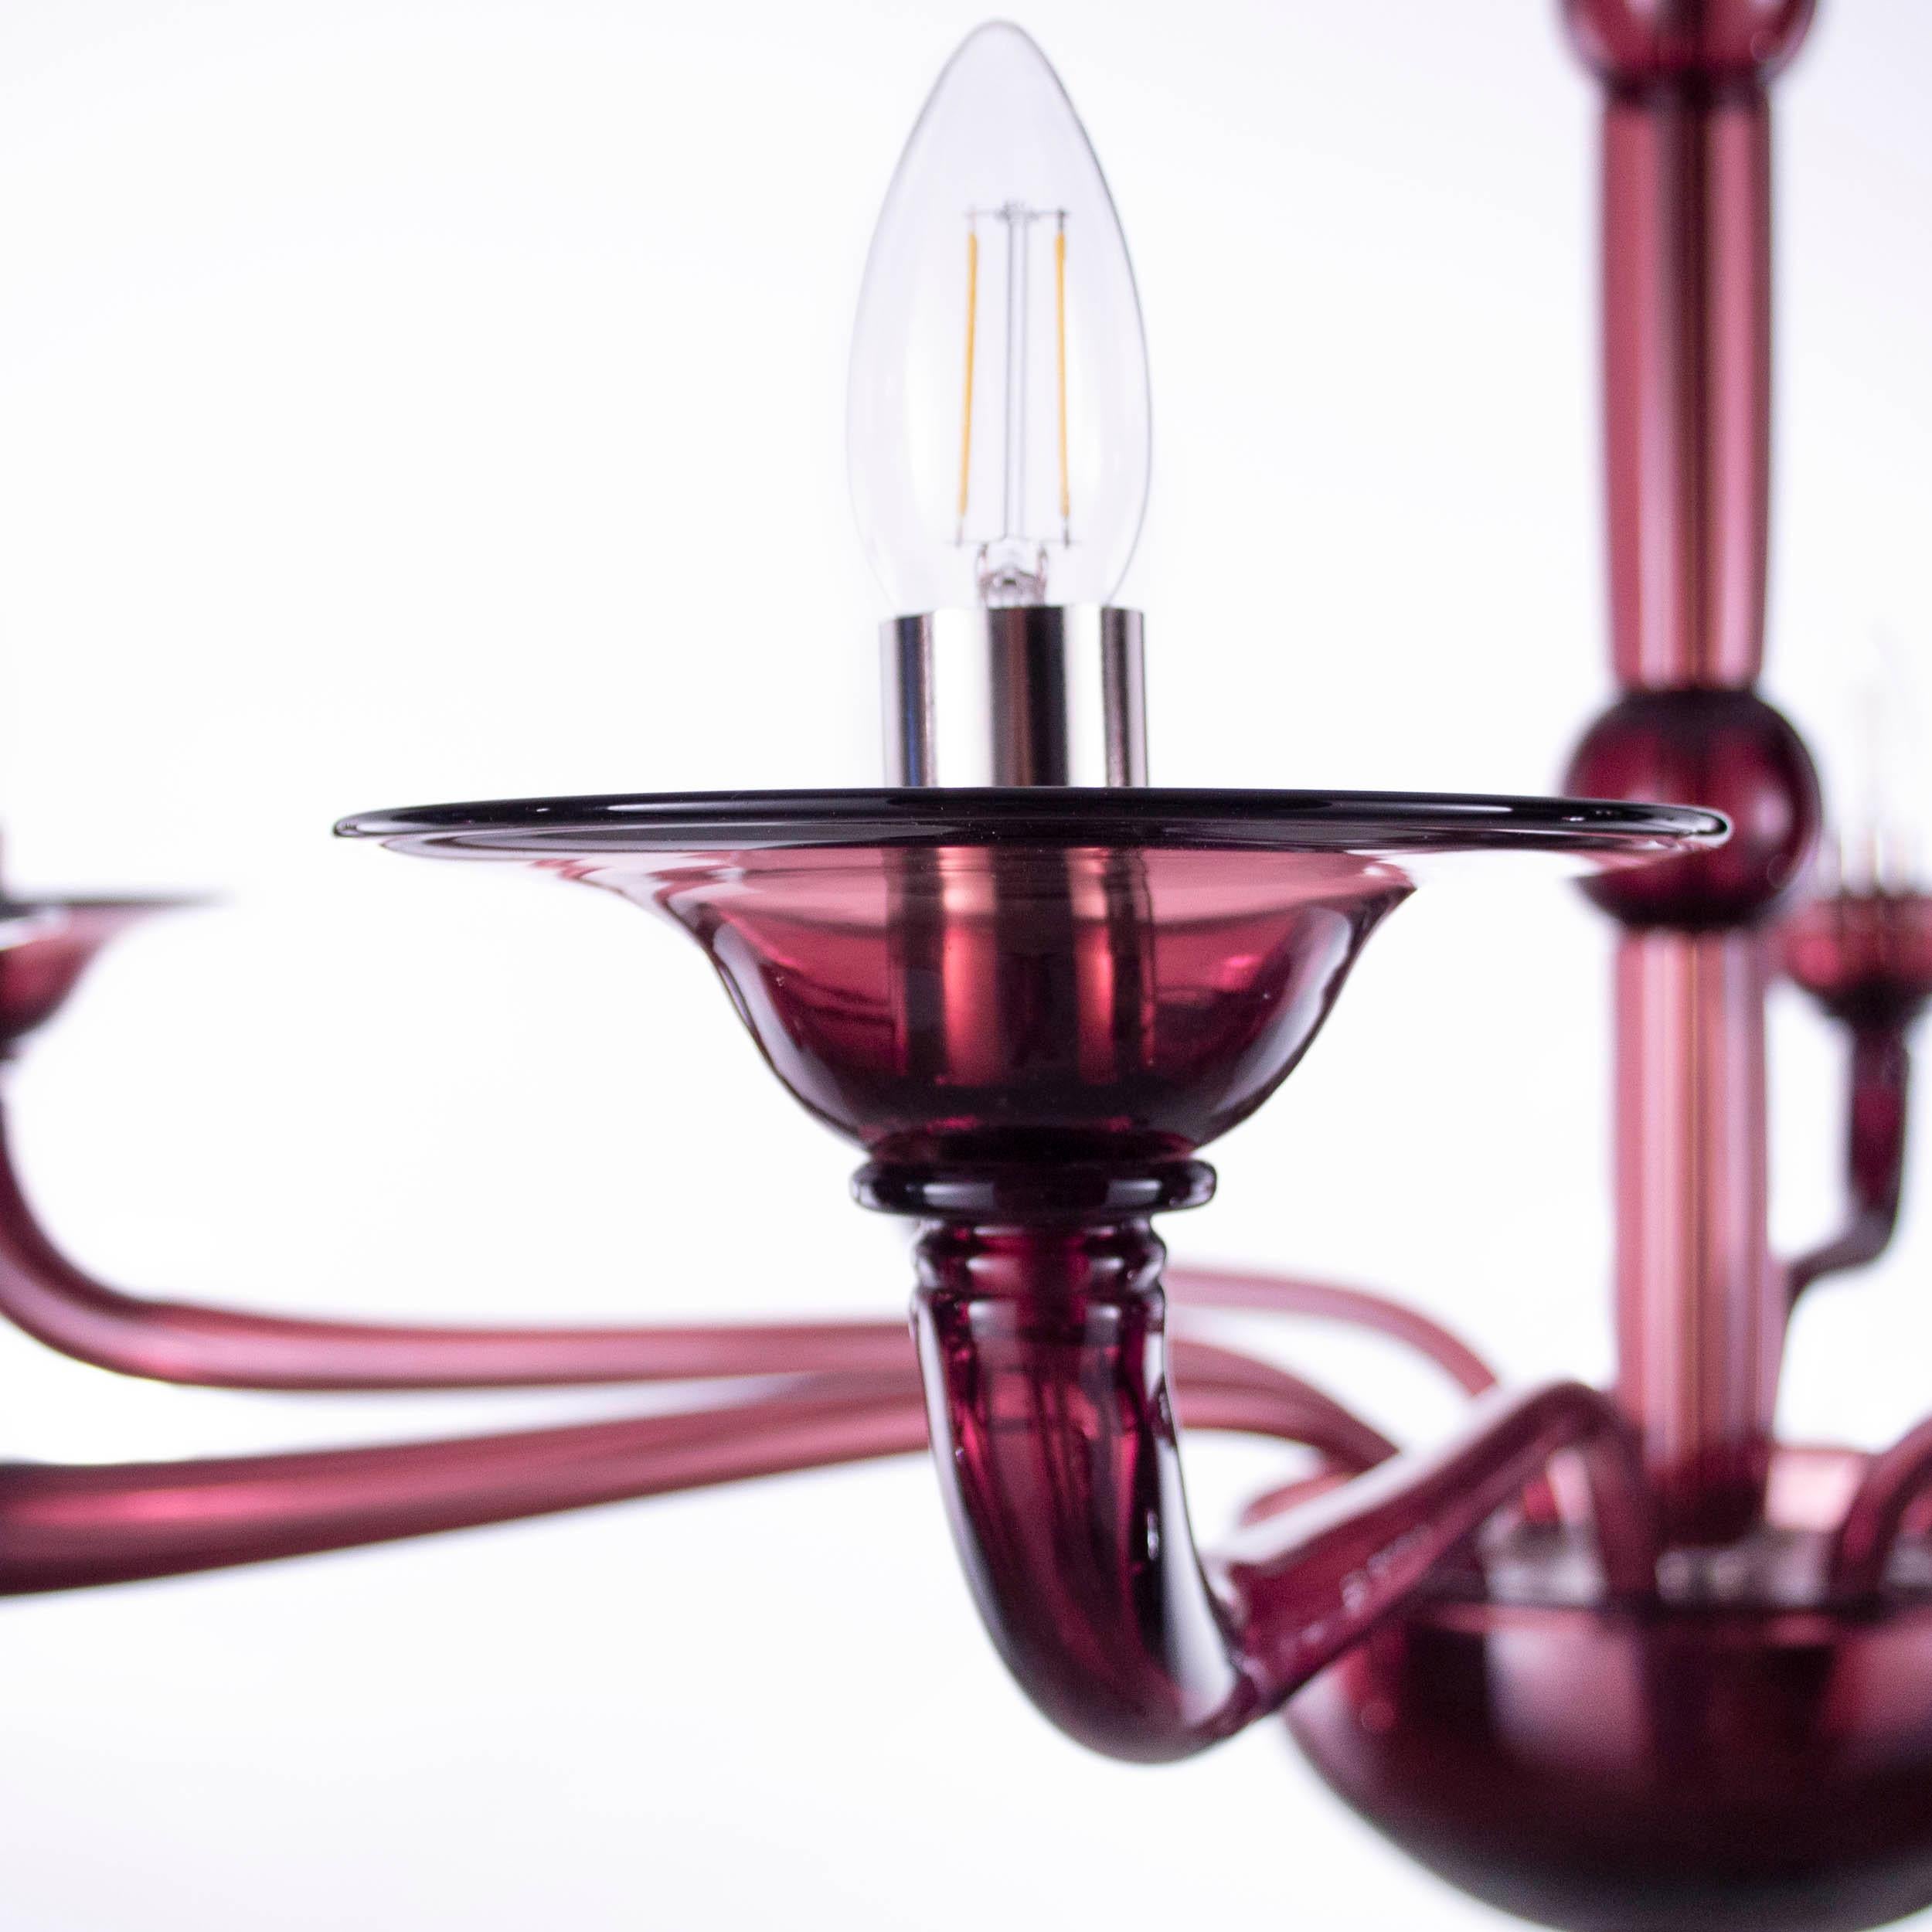 Multiforme Tobia chandelier 8 lights. Aubergine Murano glass with castle arms climbing arms.
The blown glass chandelier Tobia harks back to the design typical of the first half of the 20th century.
This lighting work is characterized by a